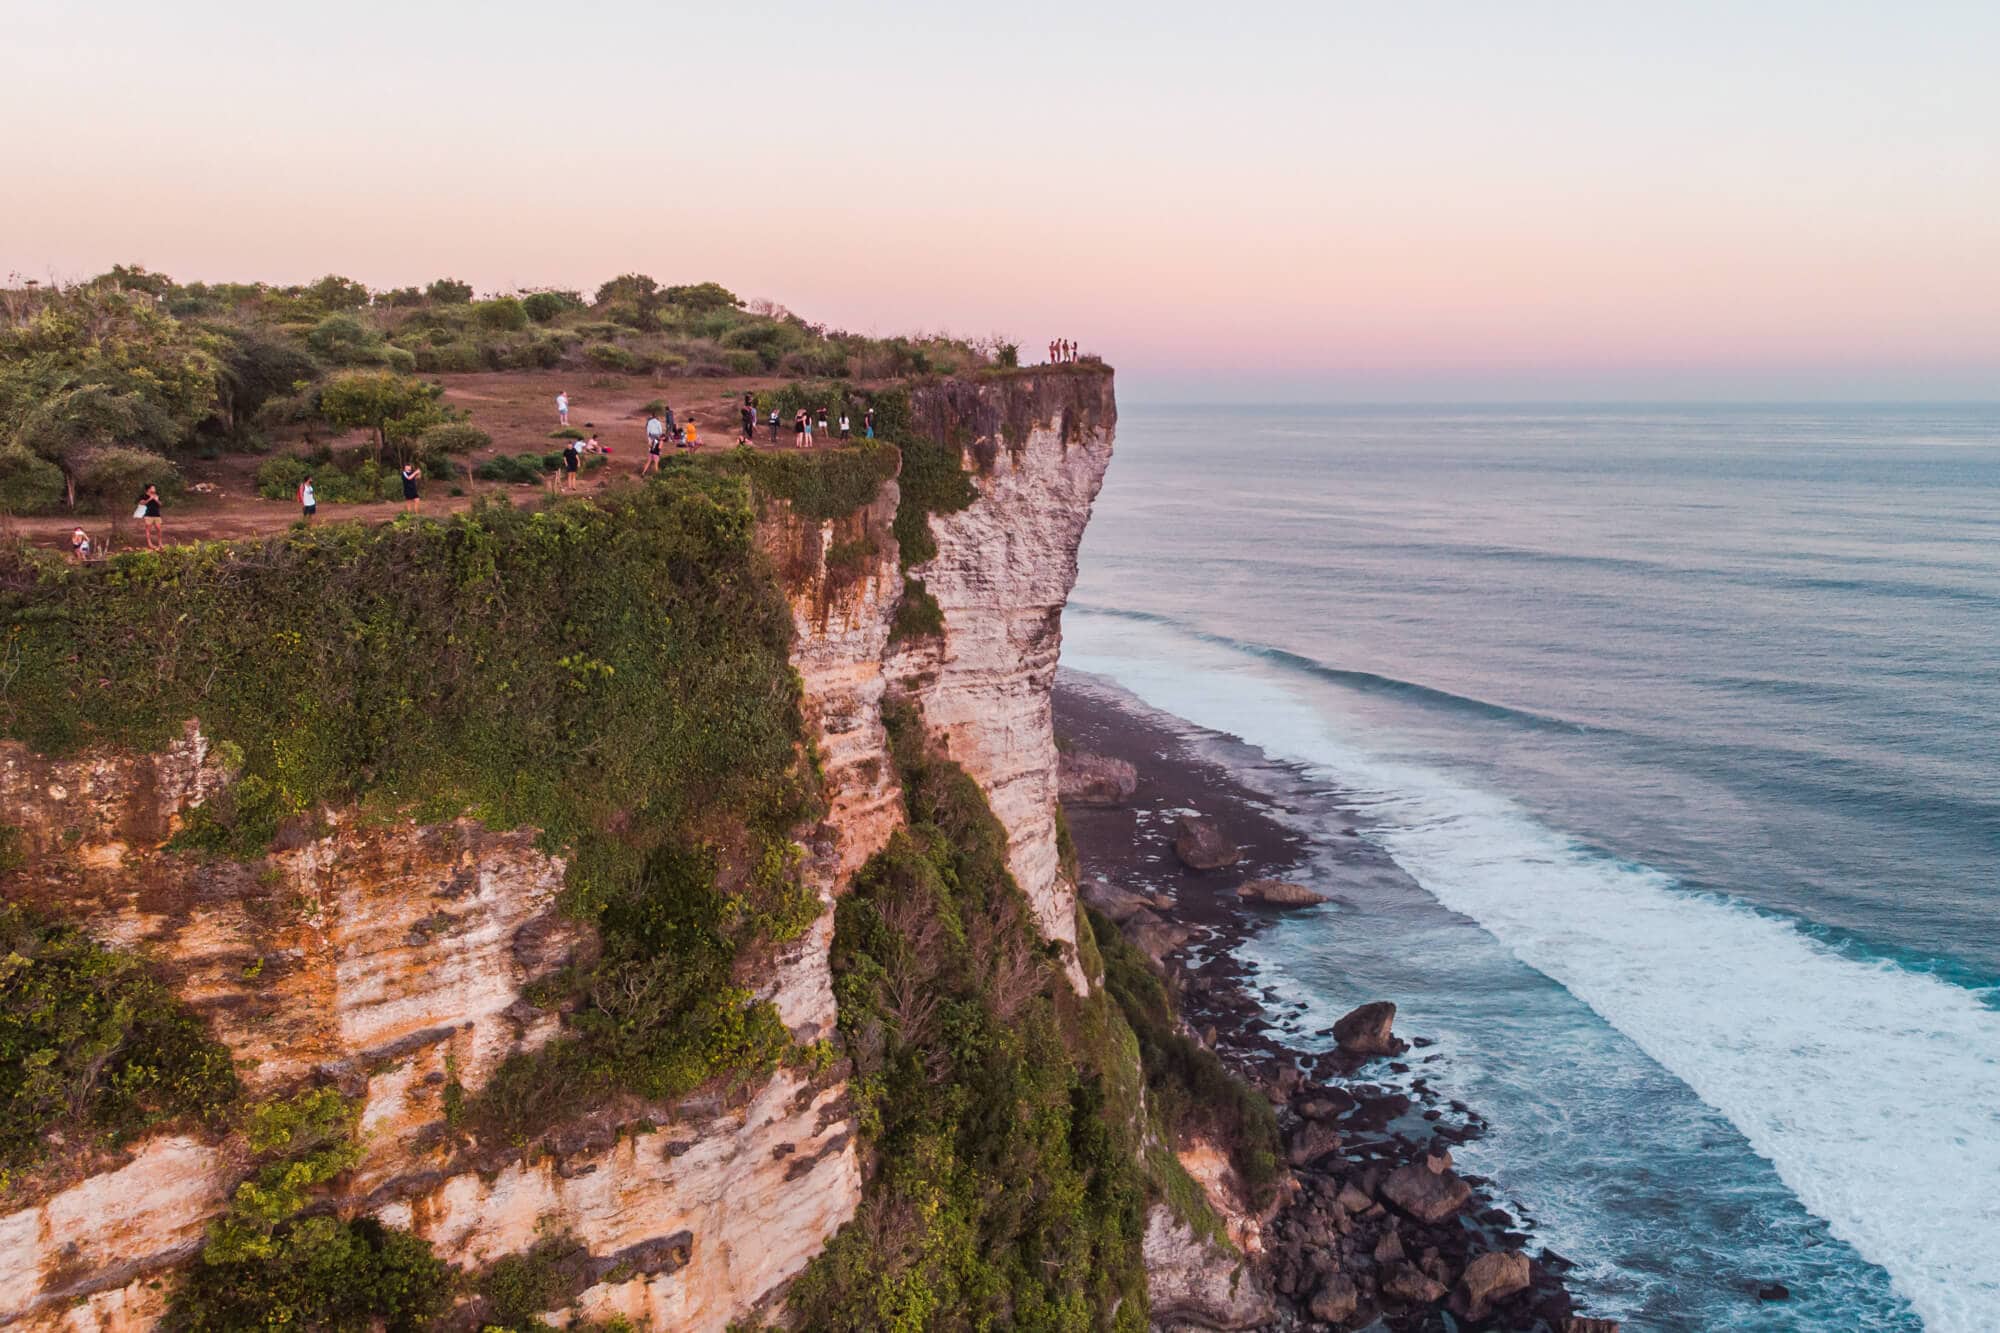 Overview of Karang Boma Cliff in Uluwatu whre people are watching the sunset